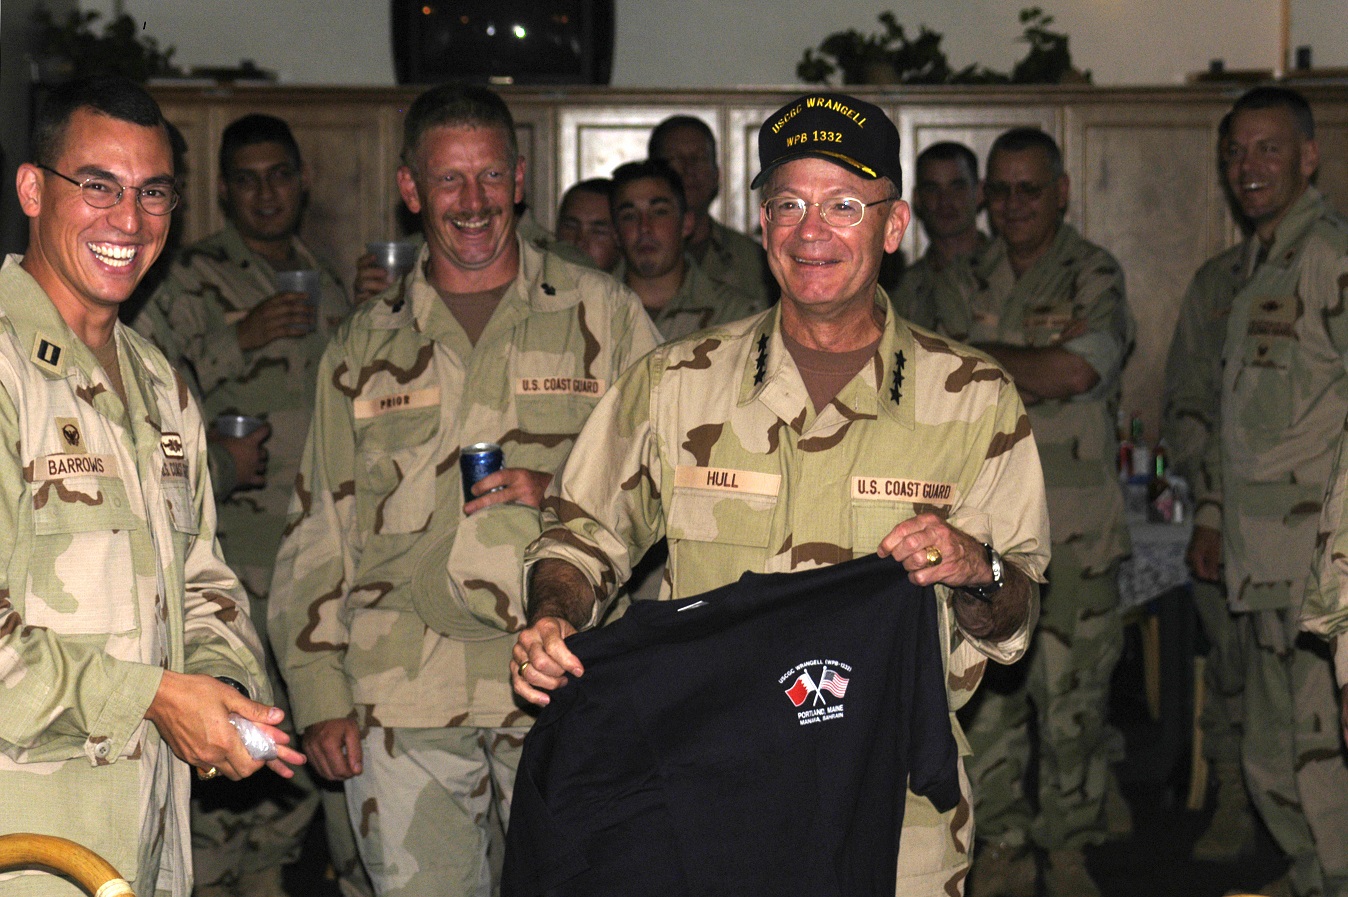 Atlantic Area commander, Vice Adm. James Hull, visits Patrol Forces Southwest Asia (PATFORSWA) in 2003, during its first year of operation. (U.S. Coast Guard)